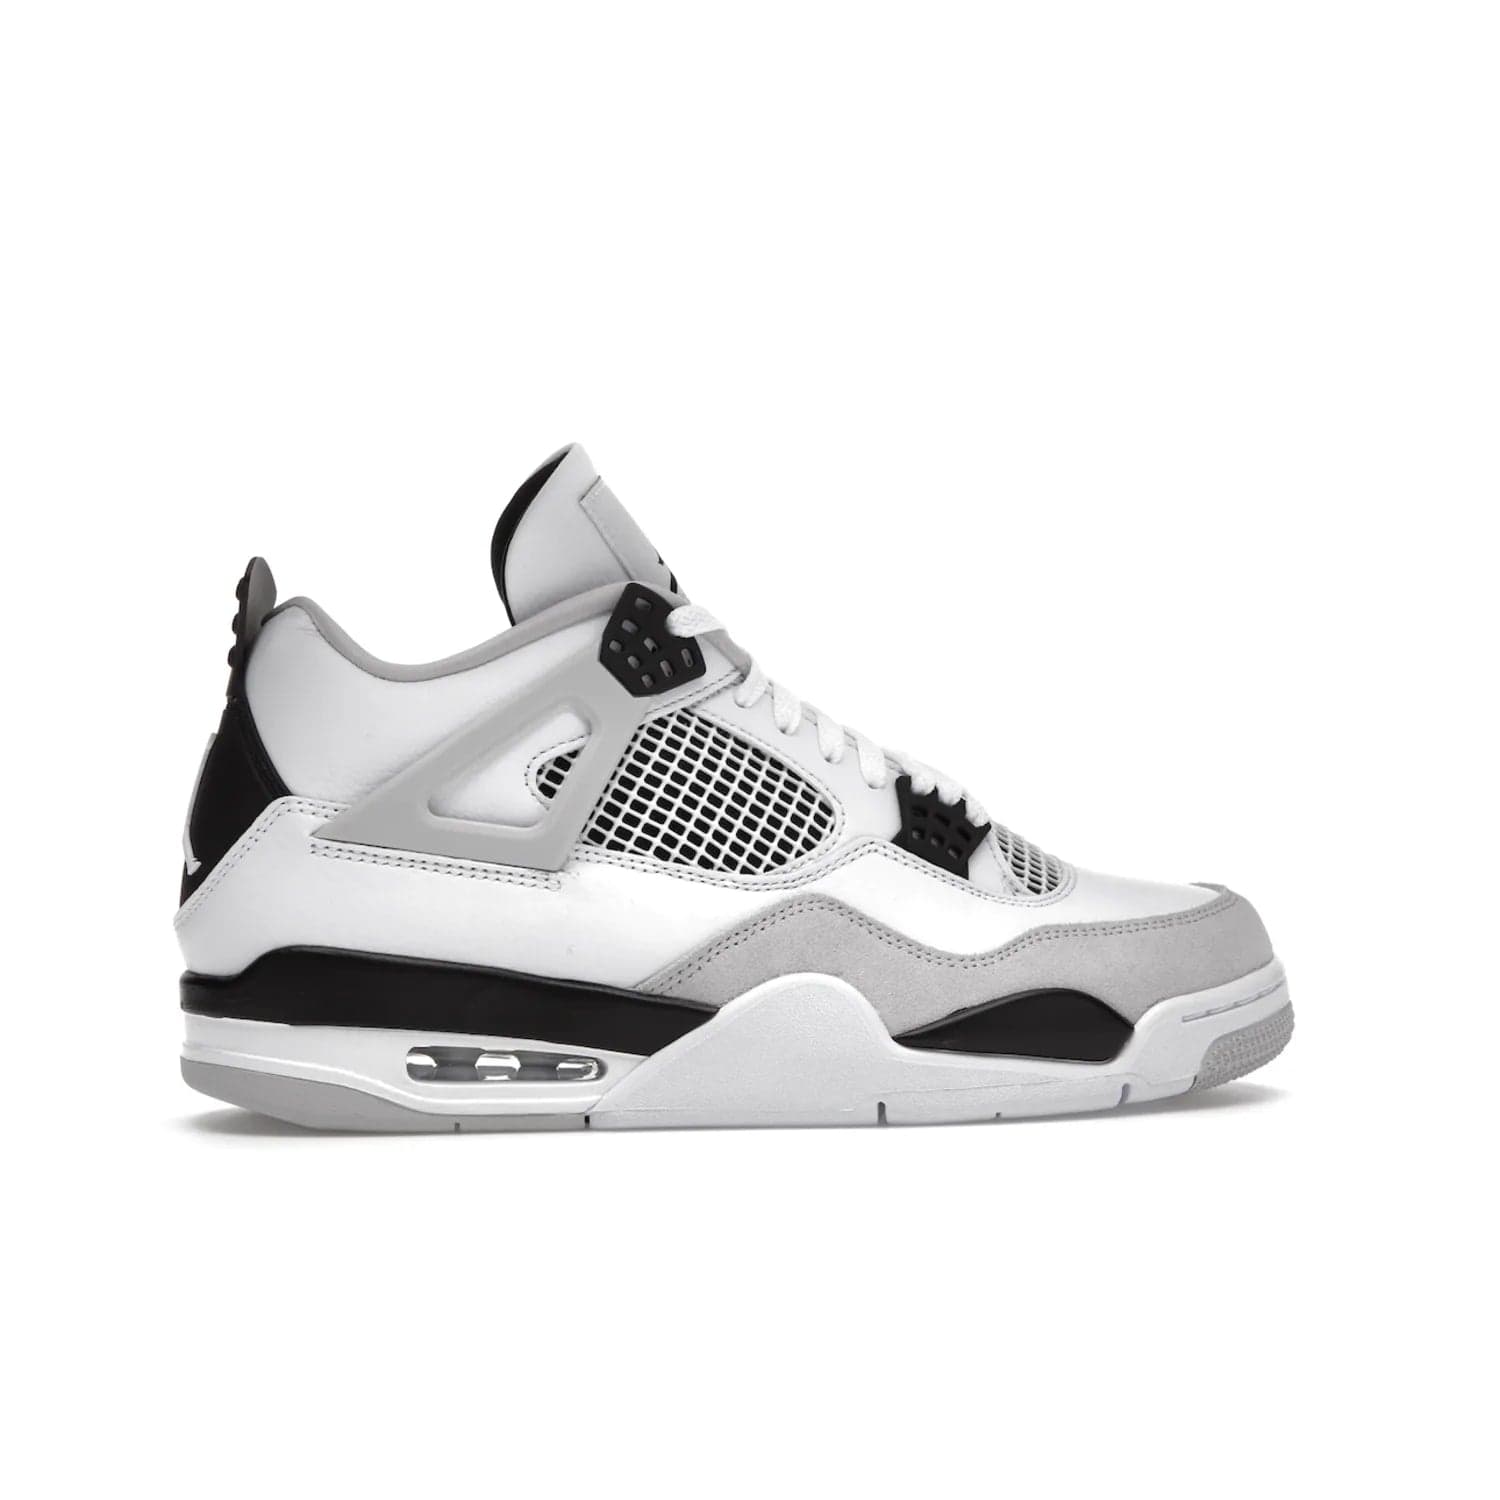 Jordan 4 Retro Military Black - Image 36 - Only at www.BallersClubKickz.com - Updated Air Jordan 4 style with a white/black/light grey sole and visible Air unit. Released in May 2022, offering timeless classic style and comfort.